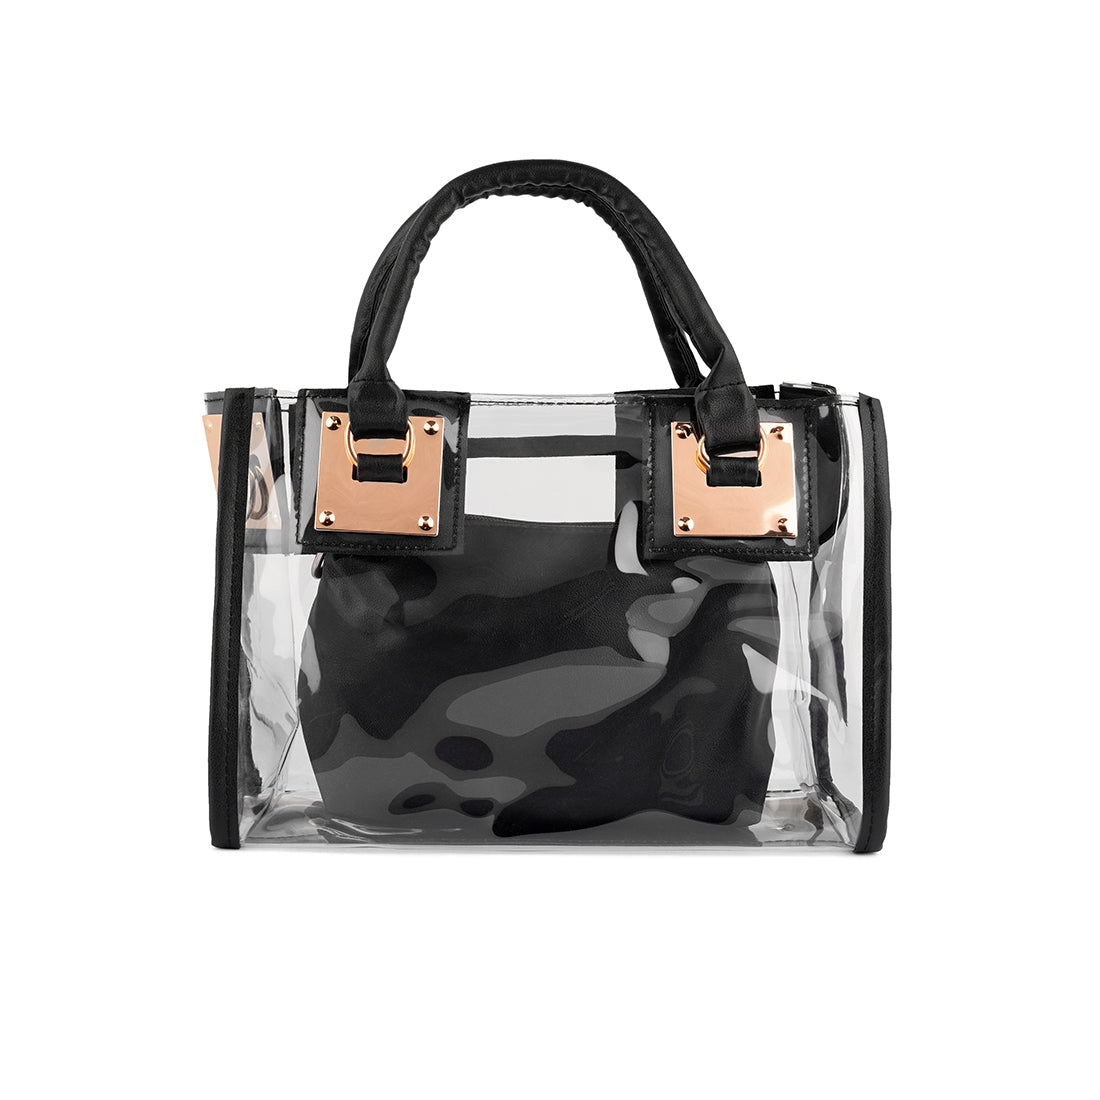 Black Clear Handbag With Pouch